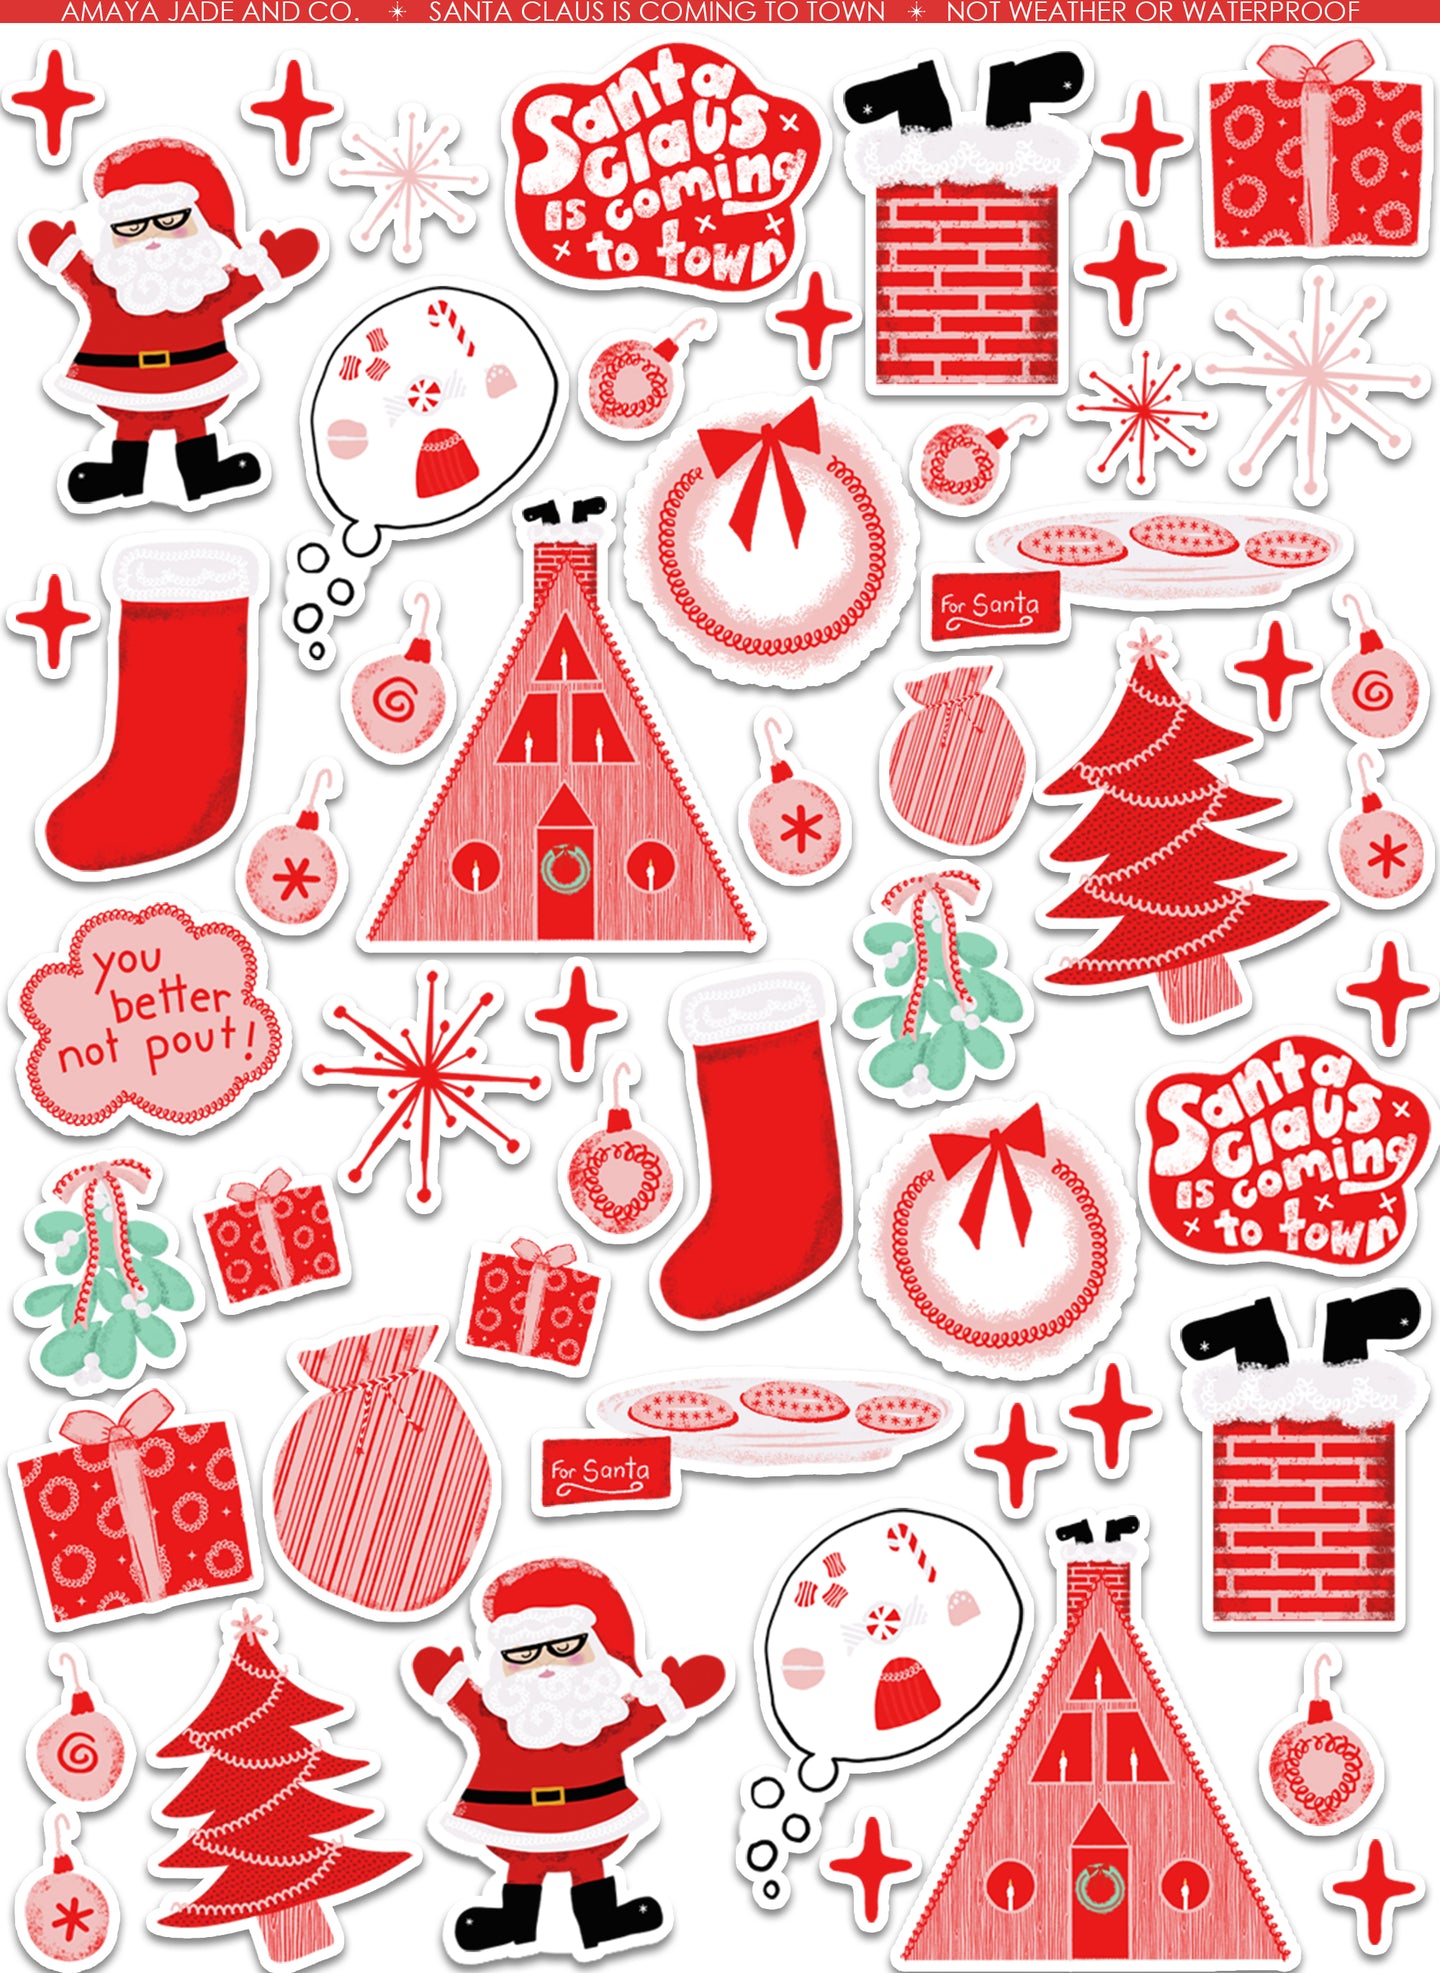 Santa Claus is Coming to Town Art Sticker Set